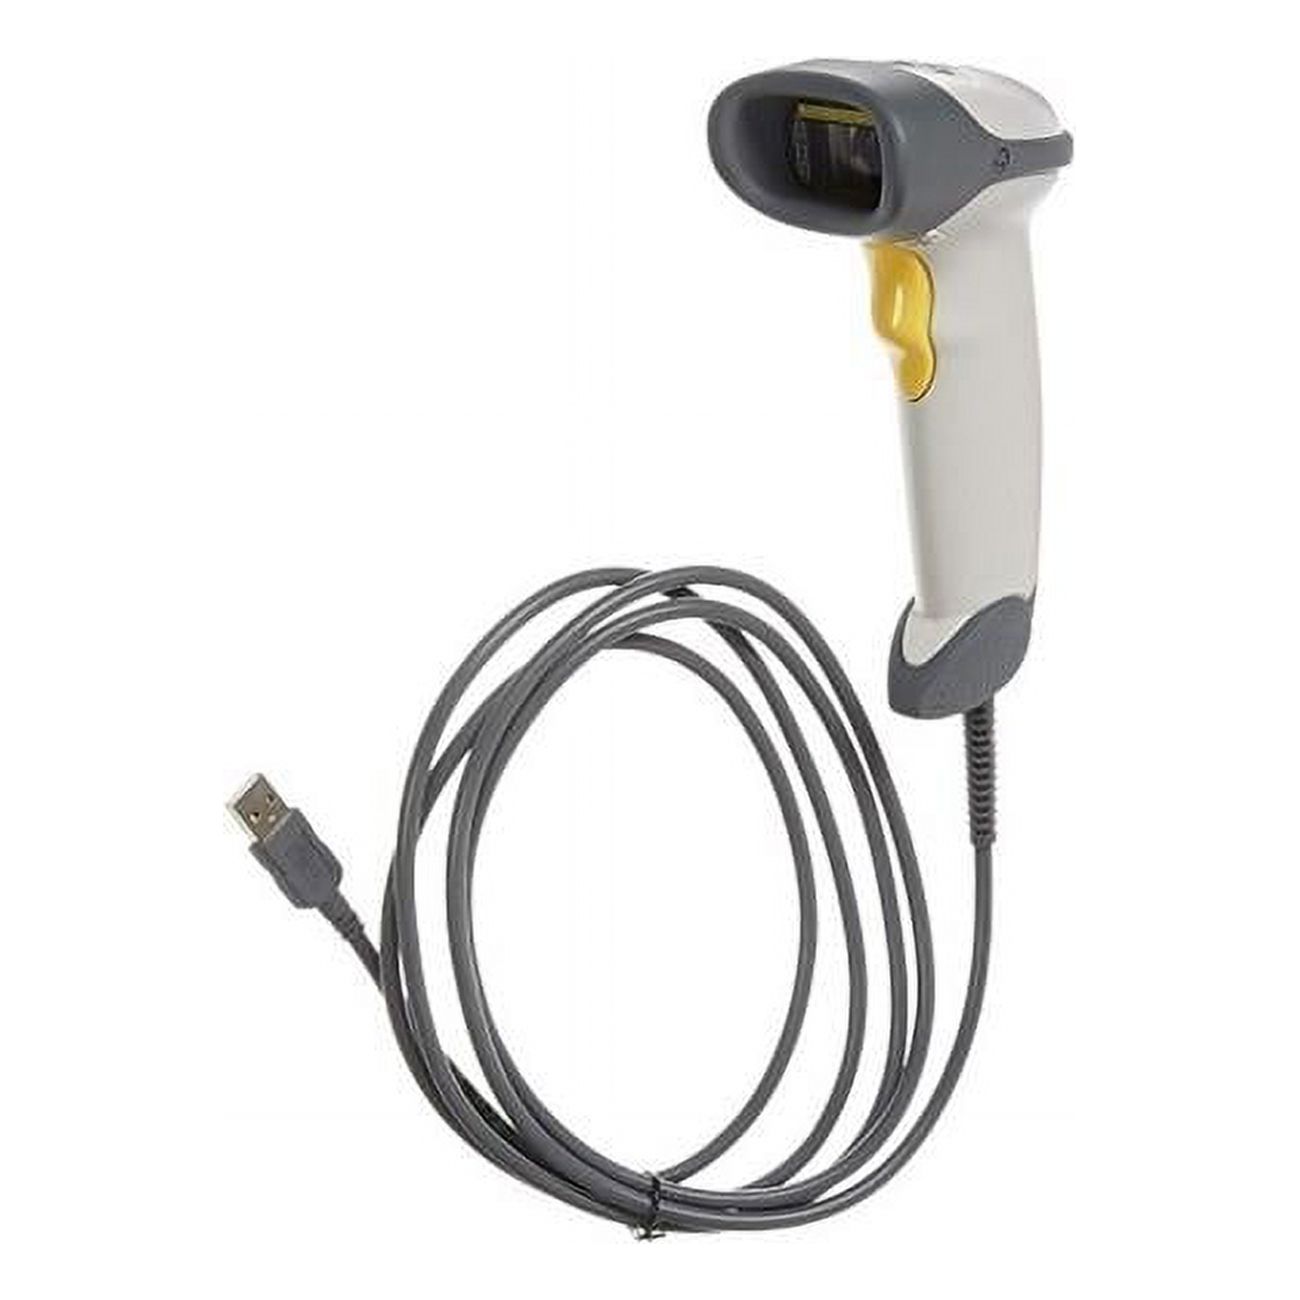 Motorola 558002844-01 LS2208-1AZU0100ZNA Symbol LS2208 Barcode Wired Scanner with USB Cable - White - image 1 of 2